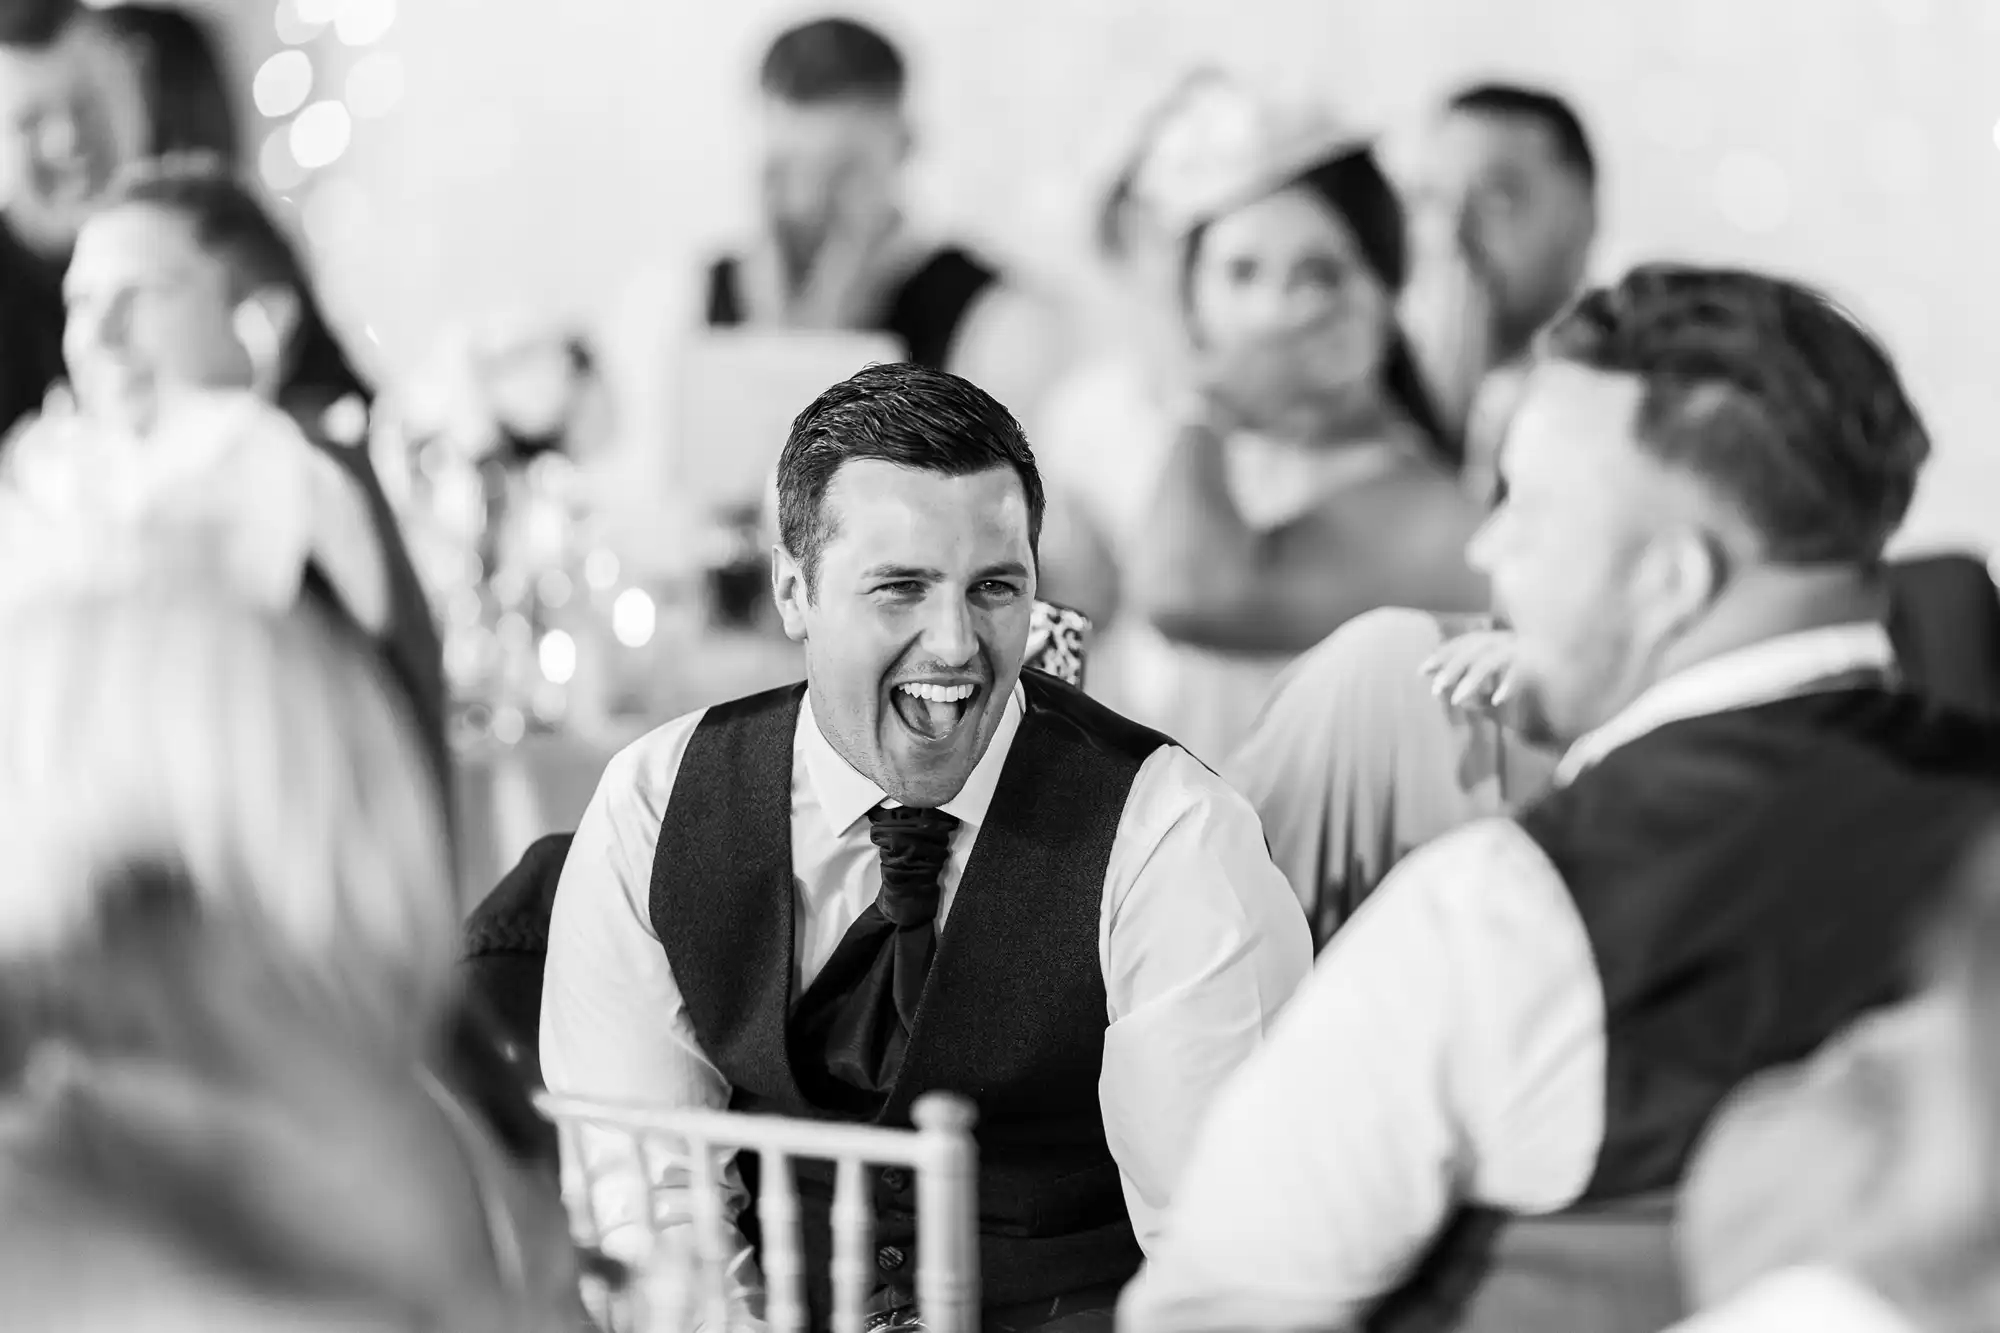 A man in formal attire is laughing heartily while seated, surrounded by other people who are also dressed formally.